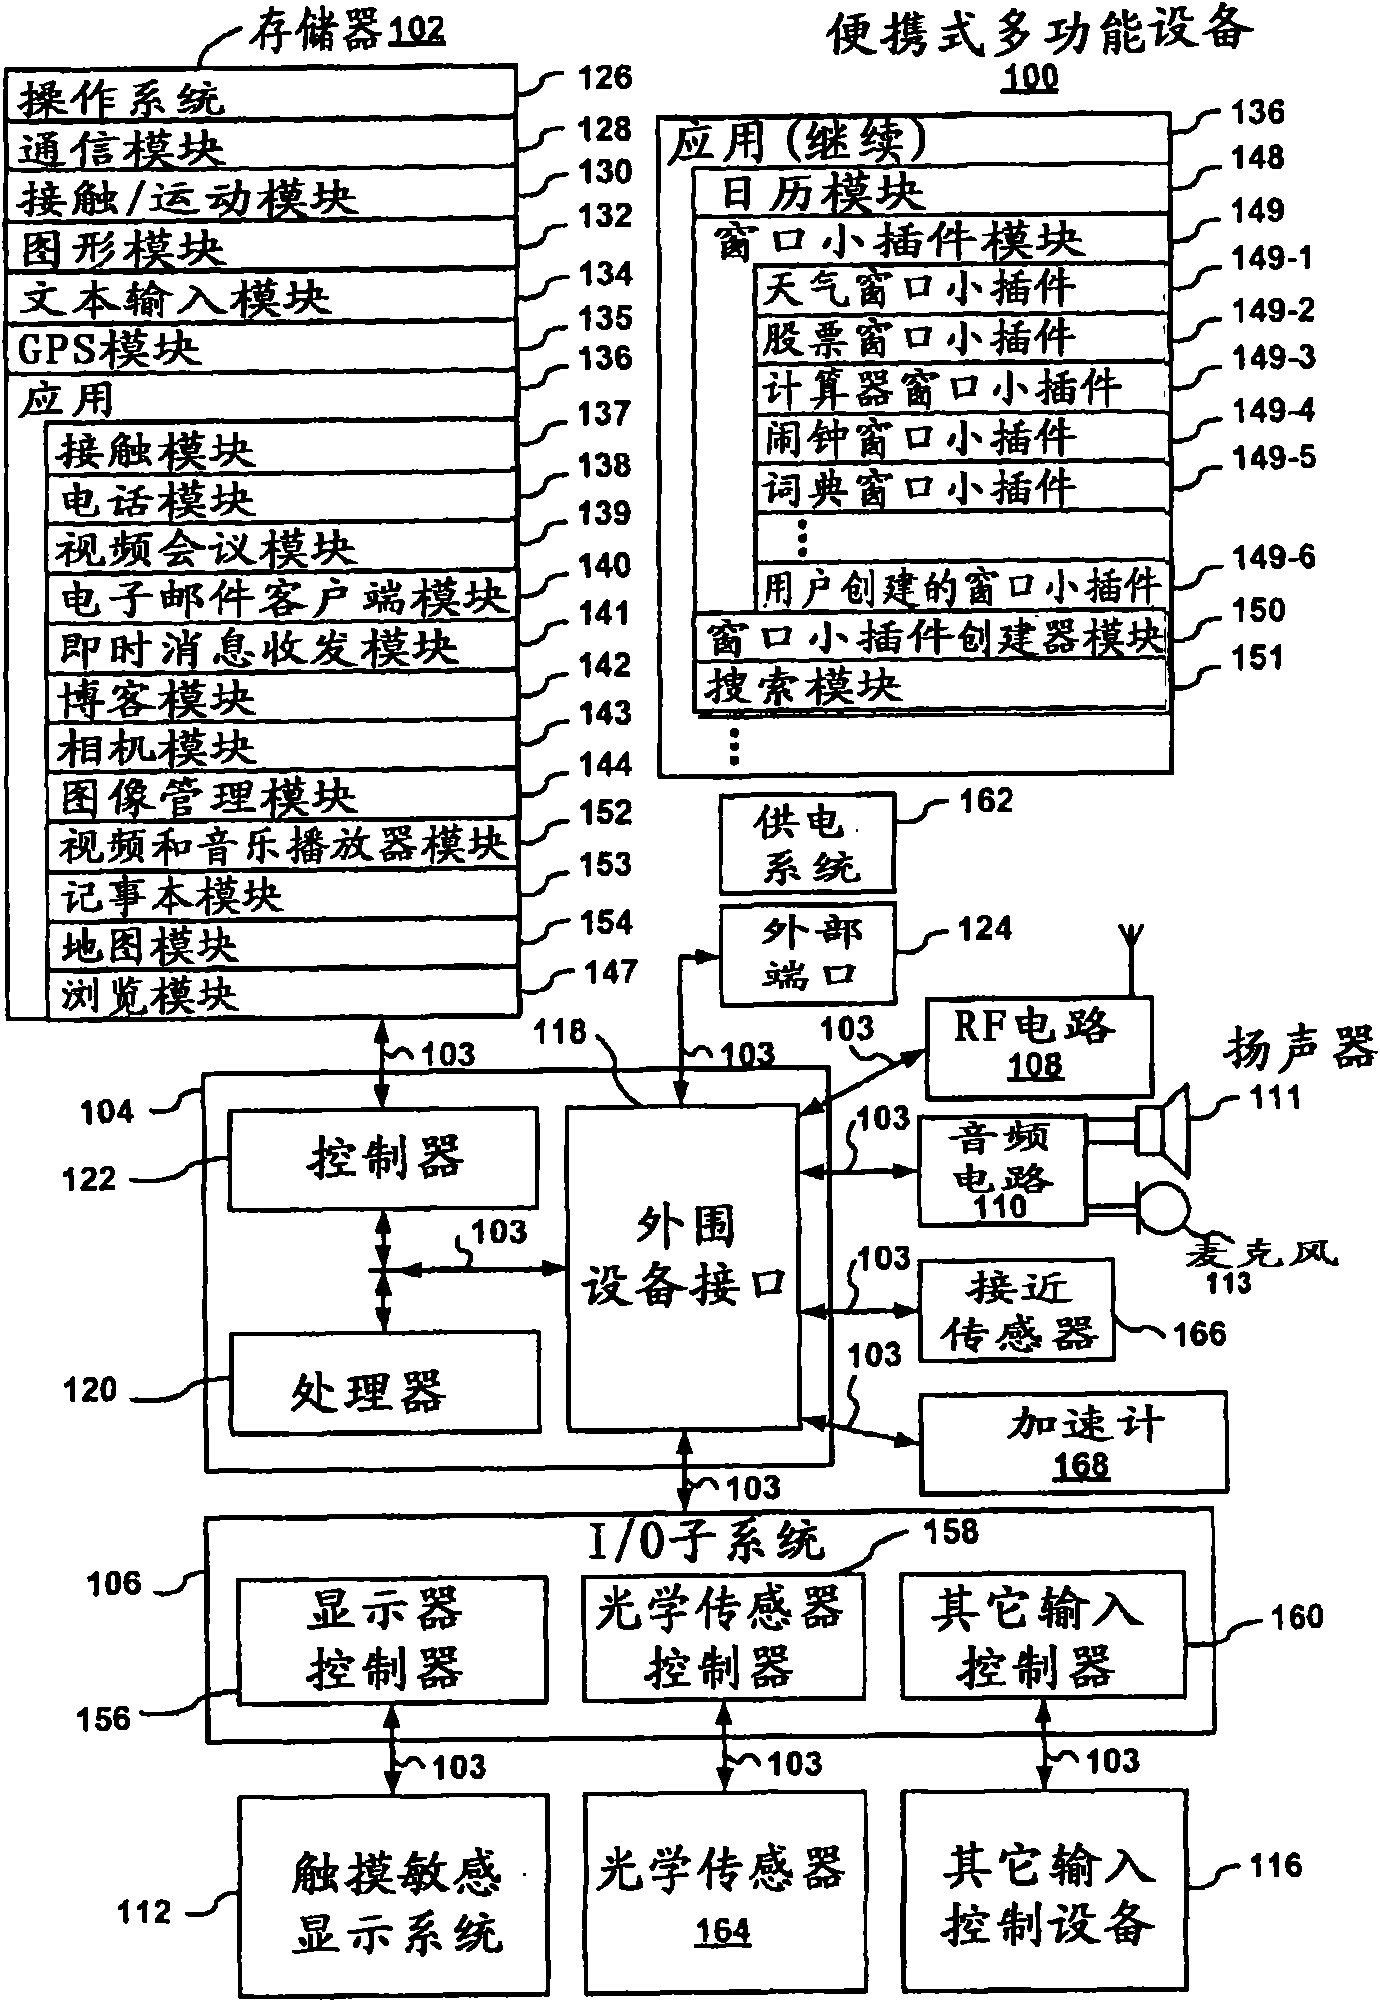 Portable multifunction device, method, and graphical user interface for interpreting a finger gesture on a touch screen display